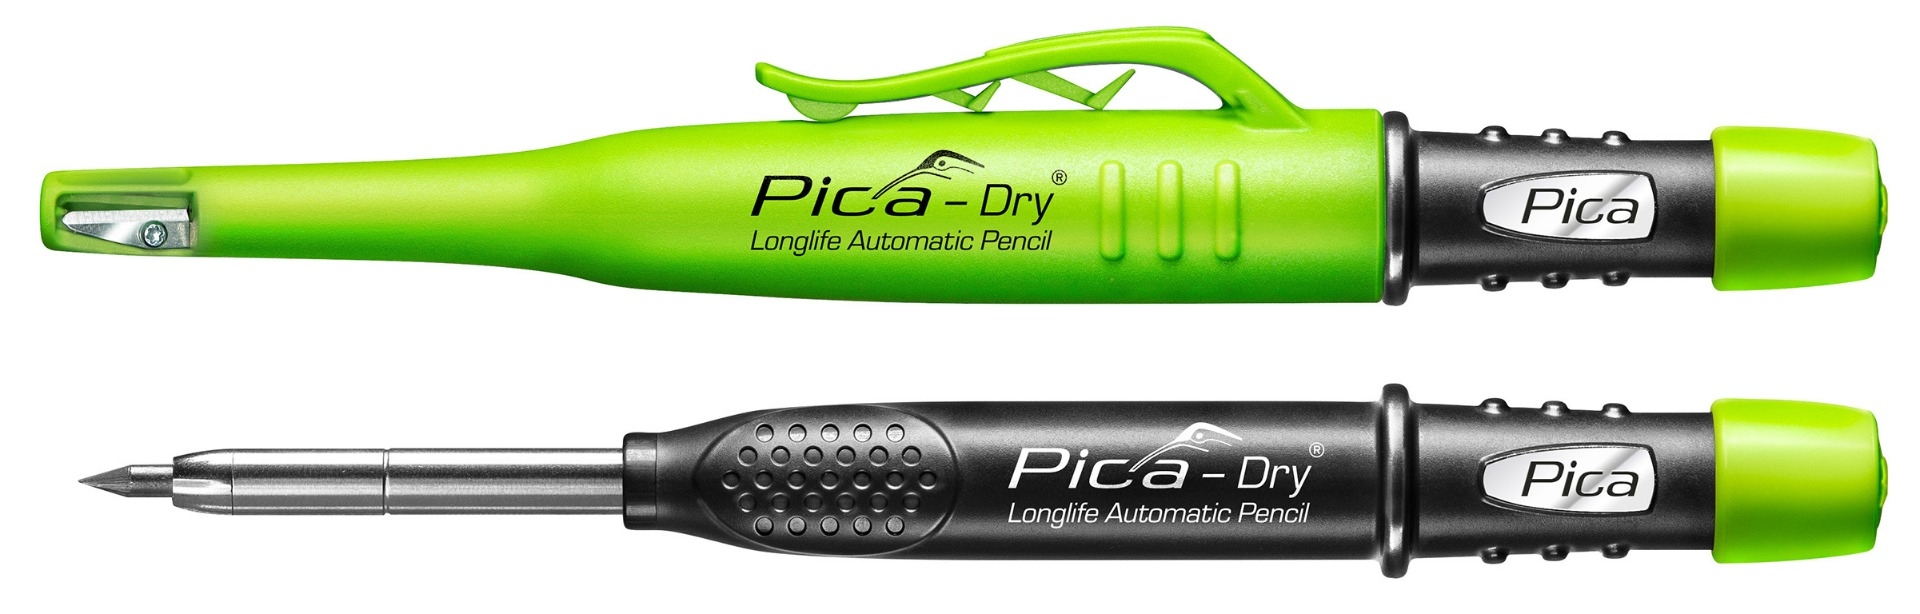 Pica Automatic carpentry pencil with graphite refill and DRY sharpener  (3030) - merXu - Negotiate prices! Wholesale purchases!